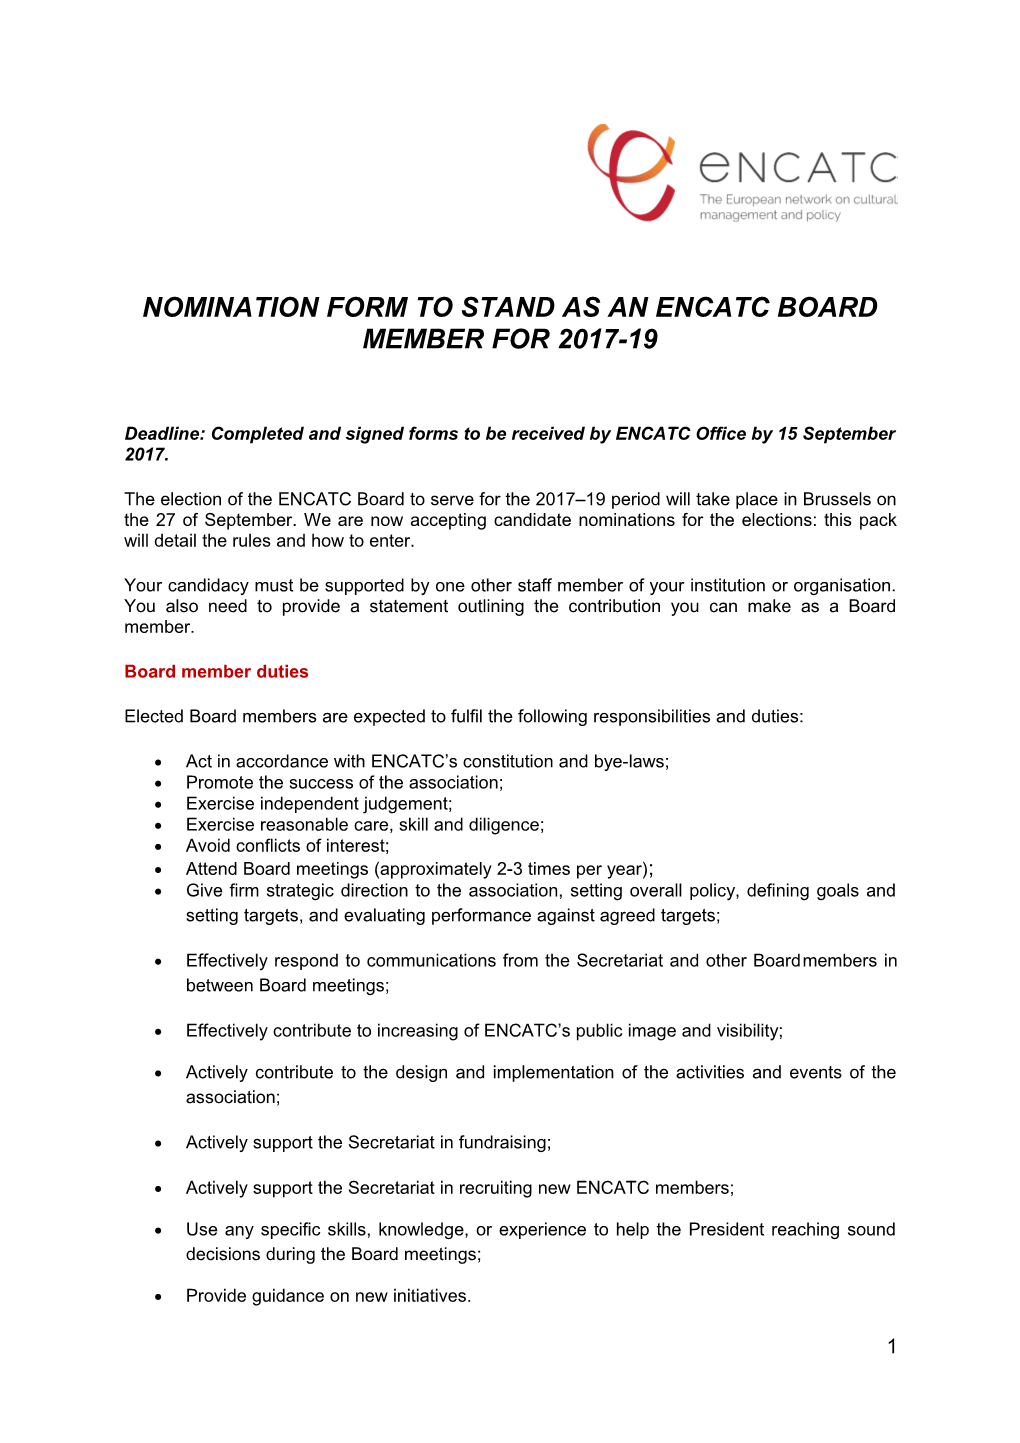 Nomination Form to Stand As an Encatc Board Member for 2017-19